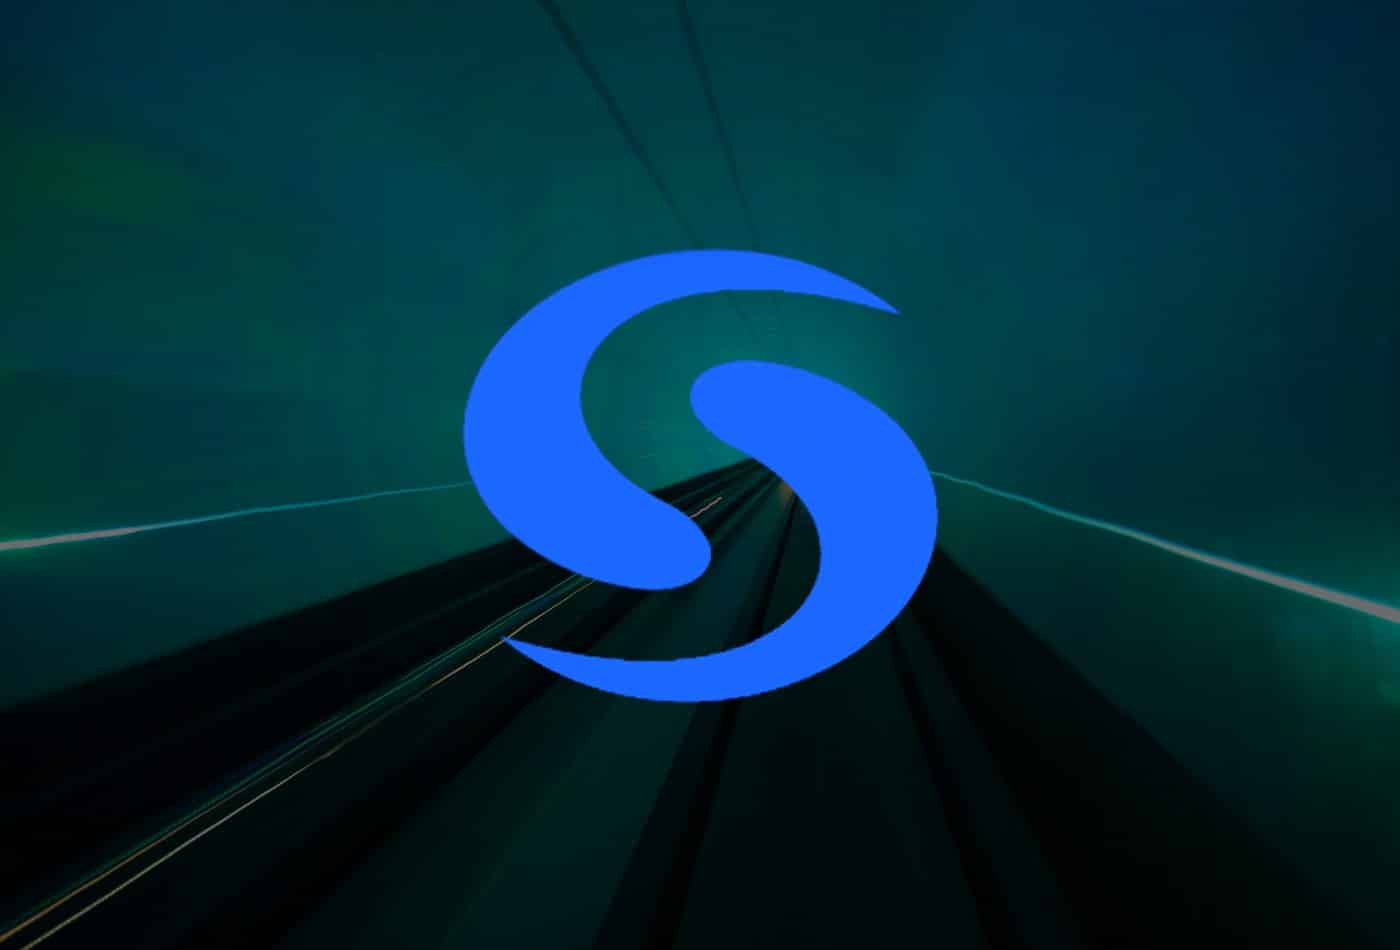 Syscoin (SYS) Price Prediction 2022-2030: The Best Analytical Forecast